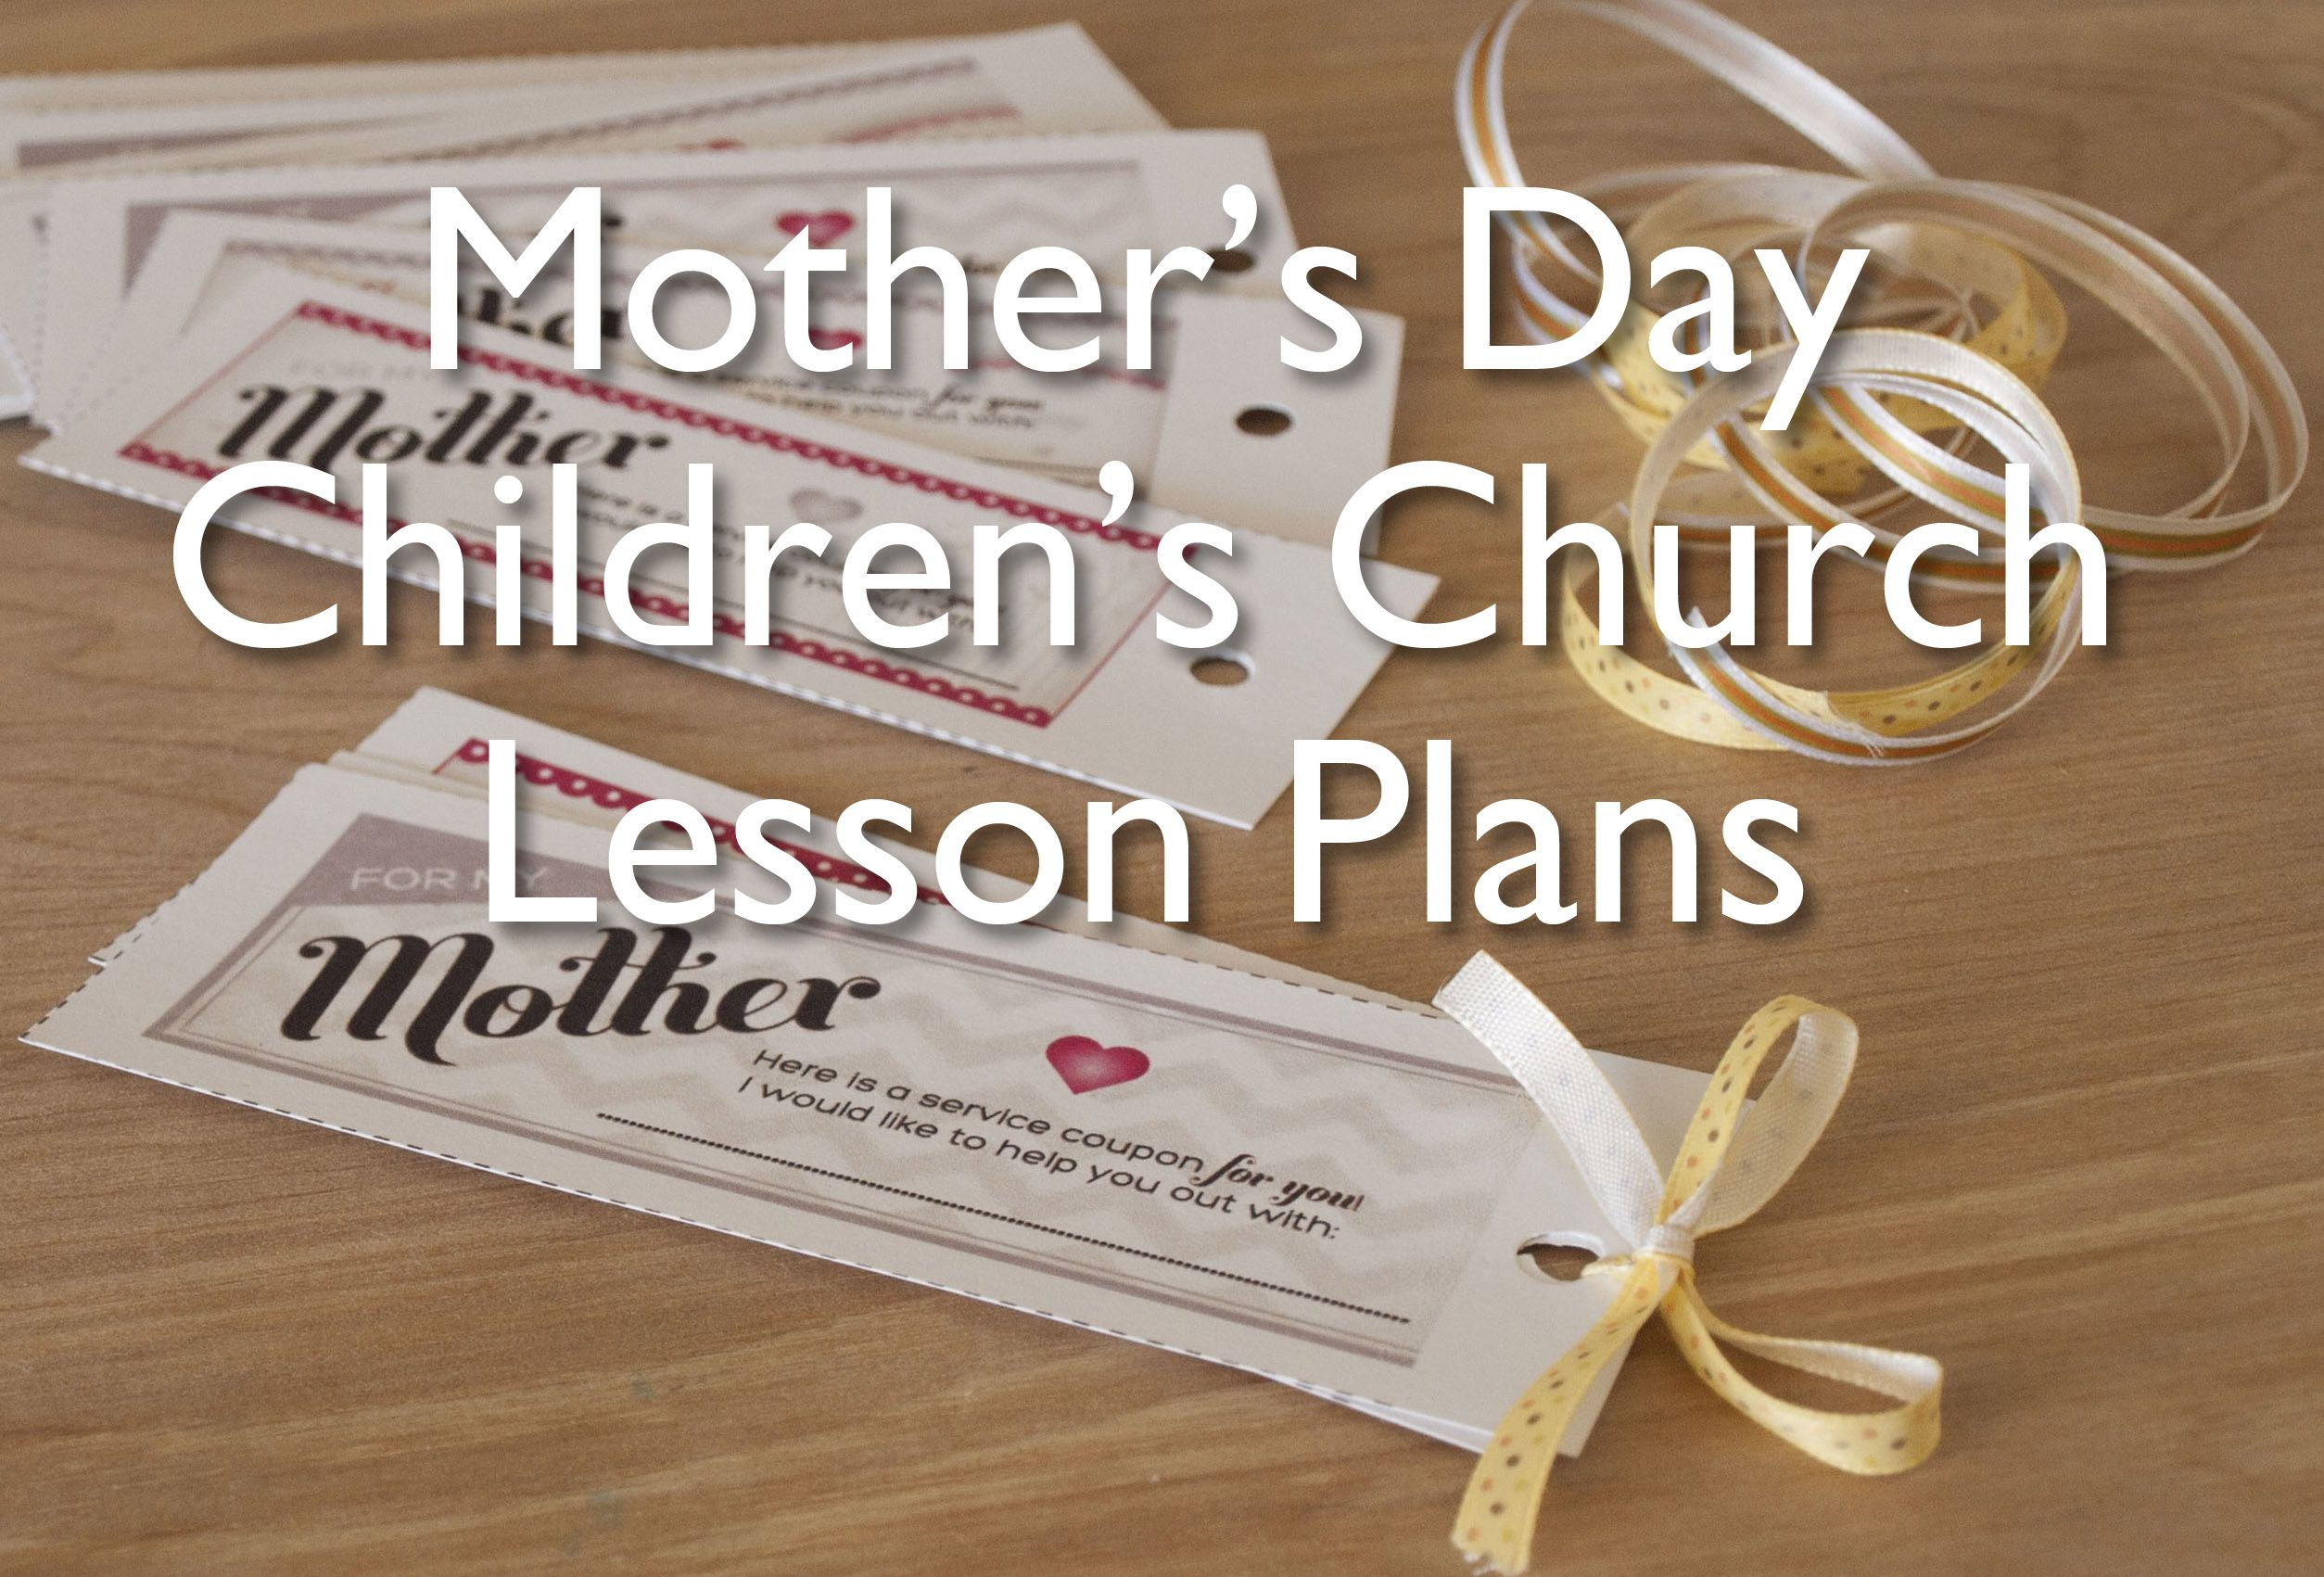 Church Mothers Day Ideas
 Mothers Day Lesson Plans for Children s Church with Free